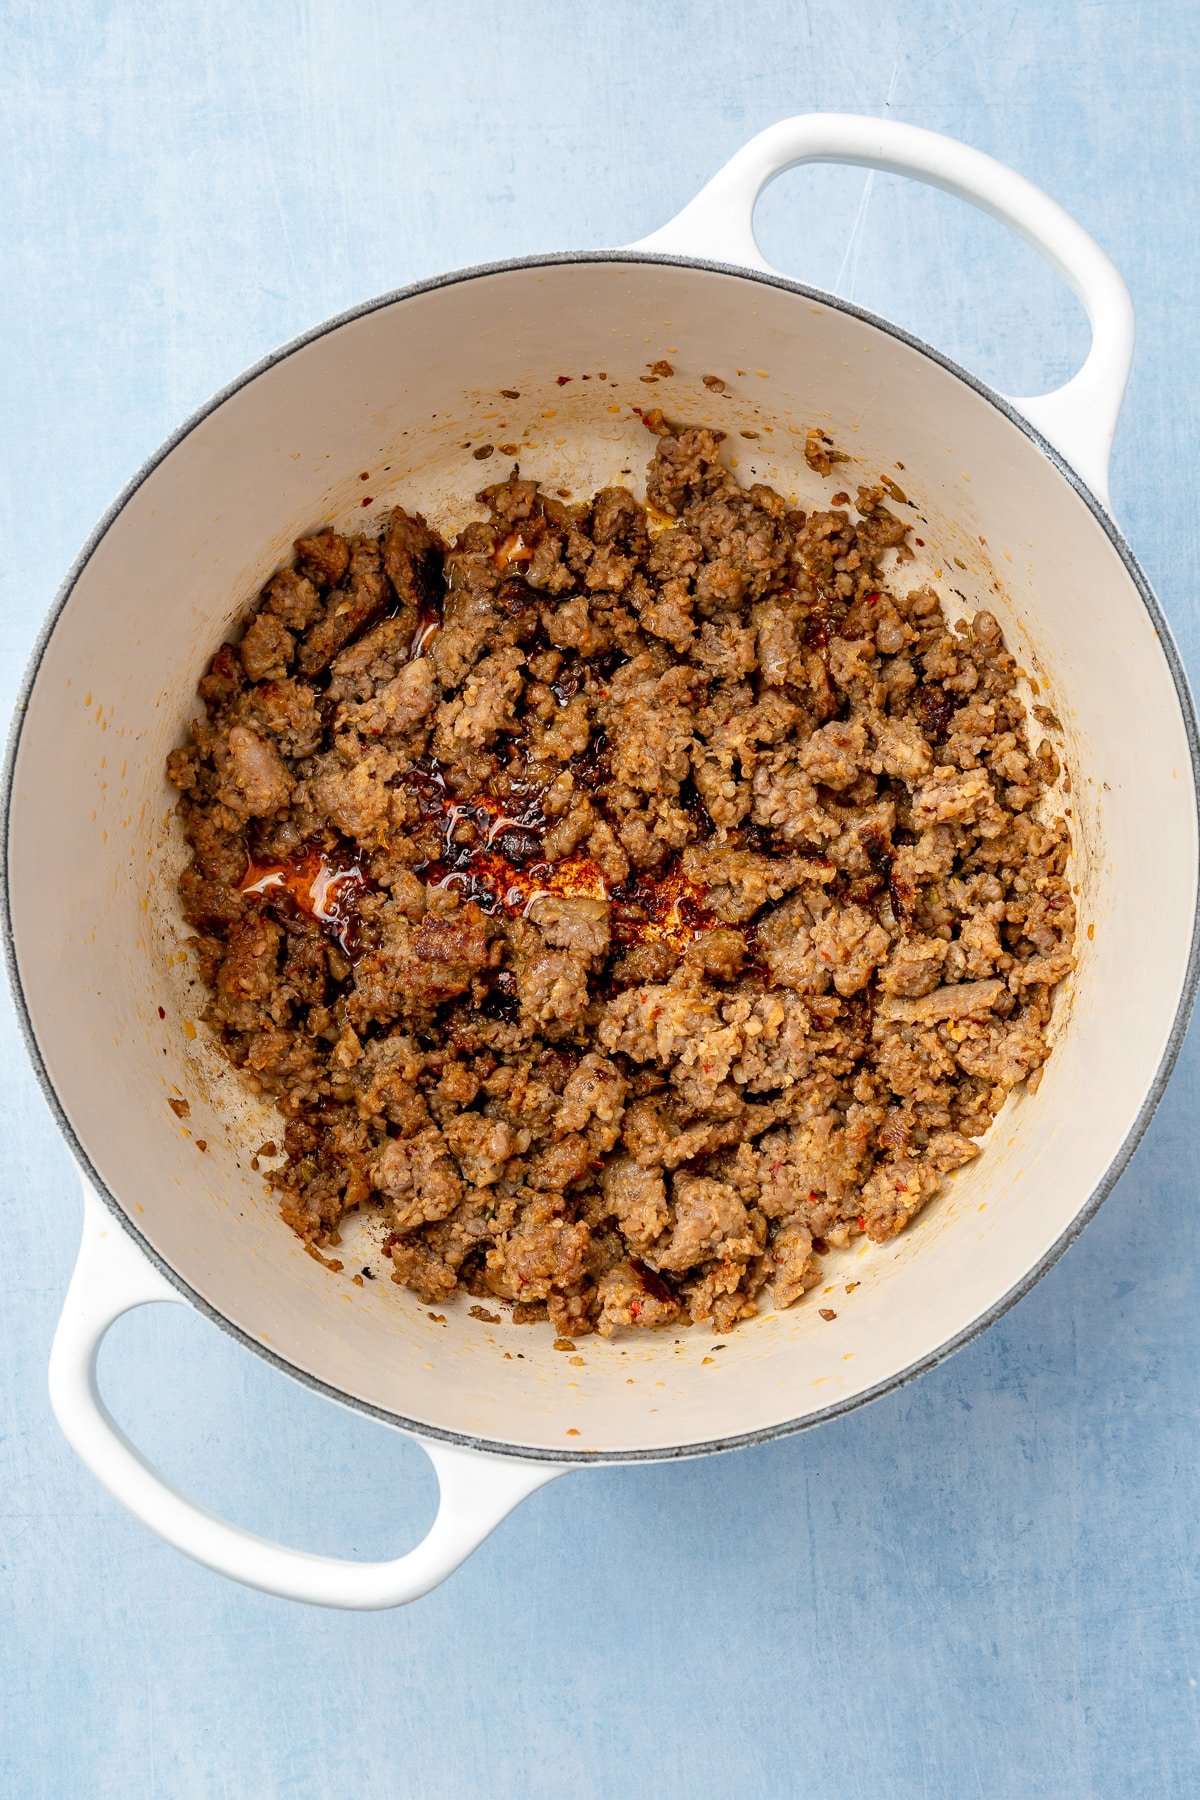 Sausage has been crumbled and cooked to a light brown in a white, enameled pot.